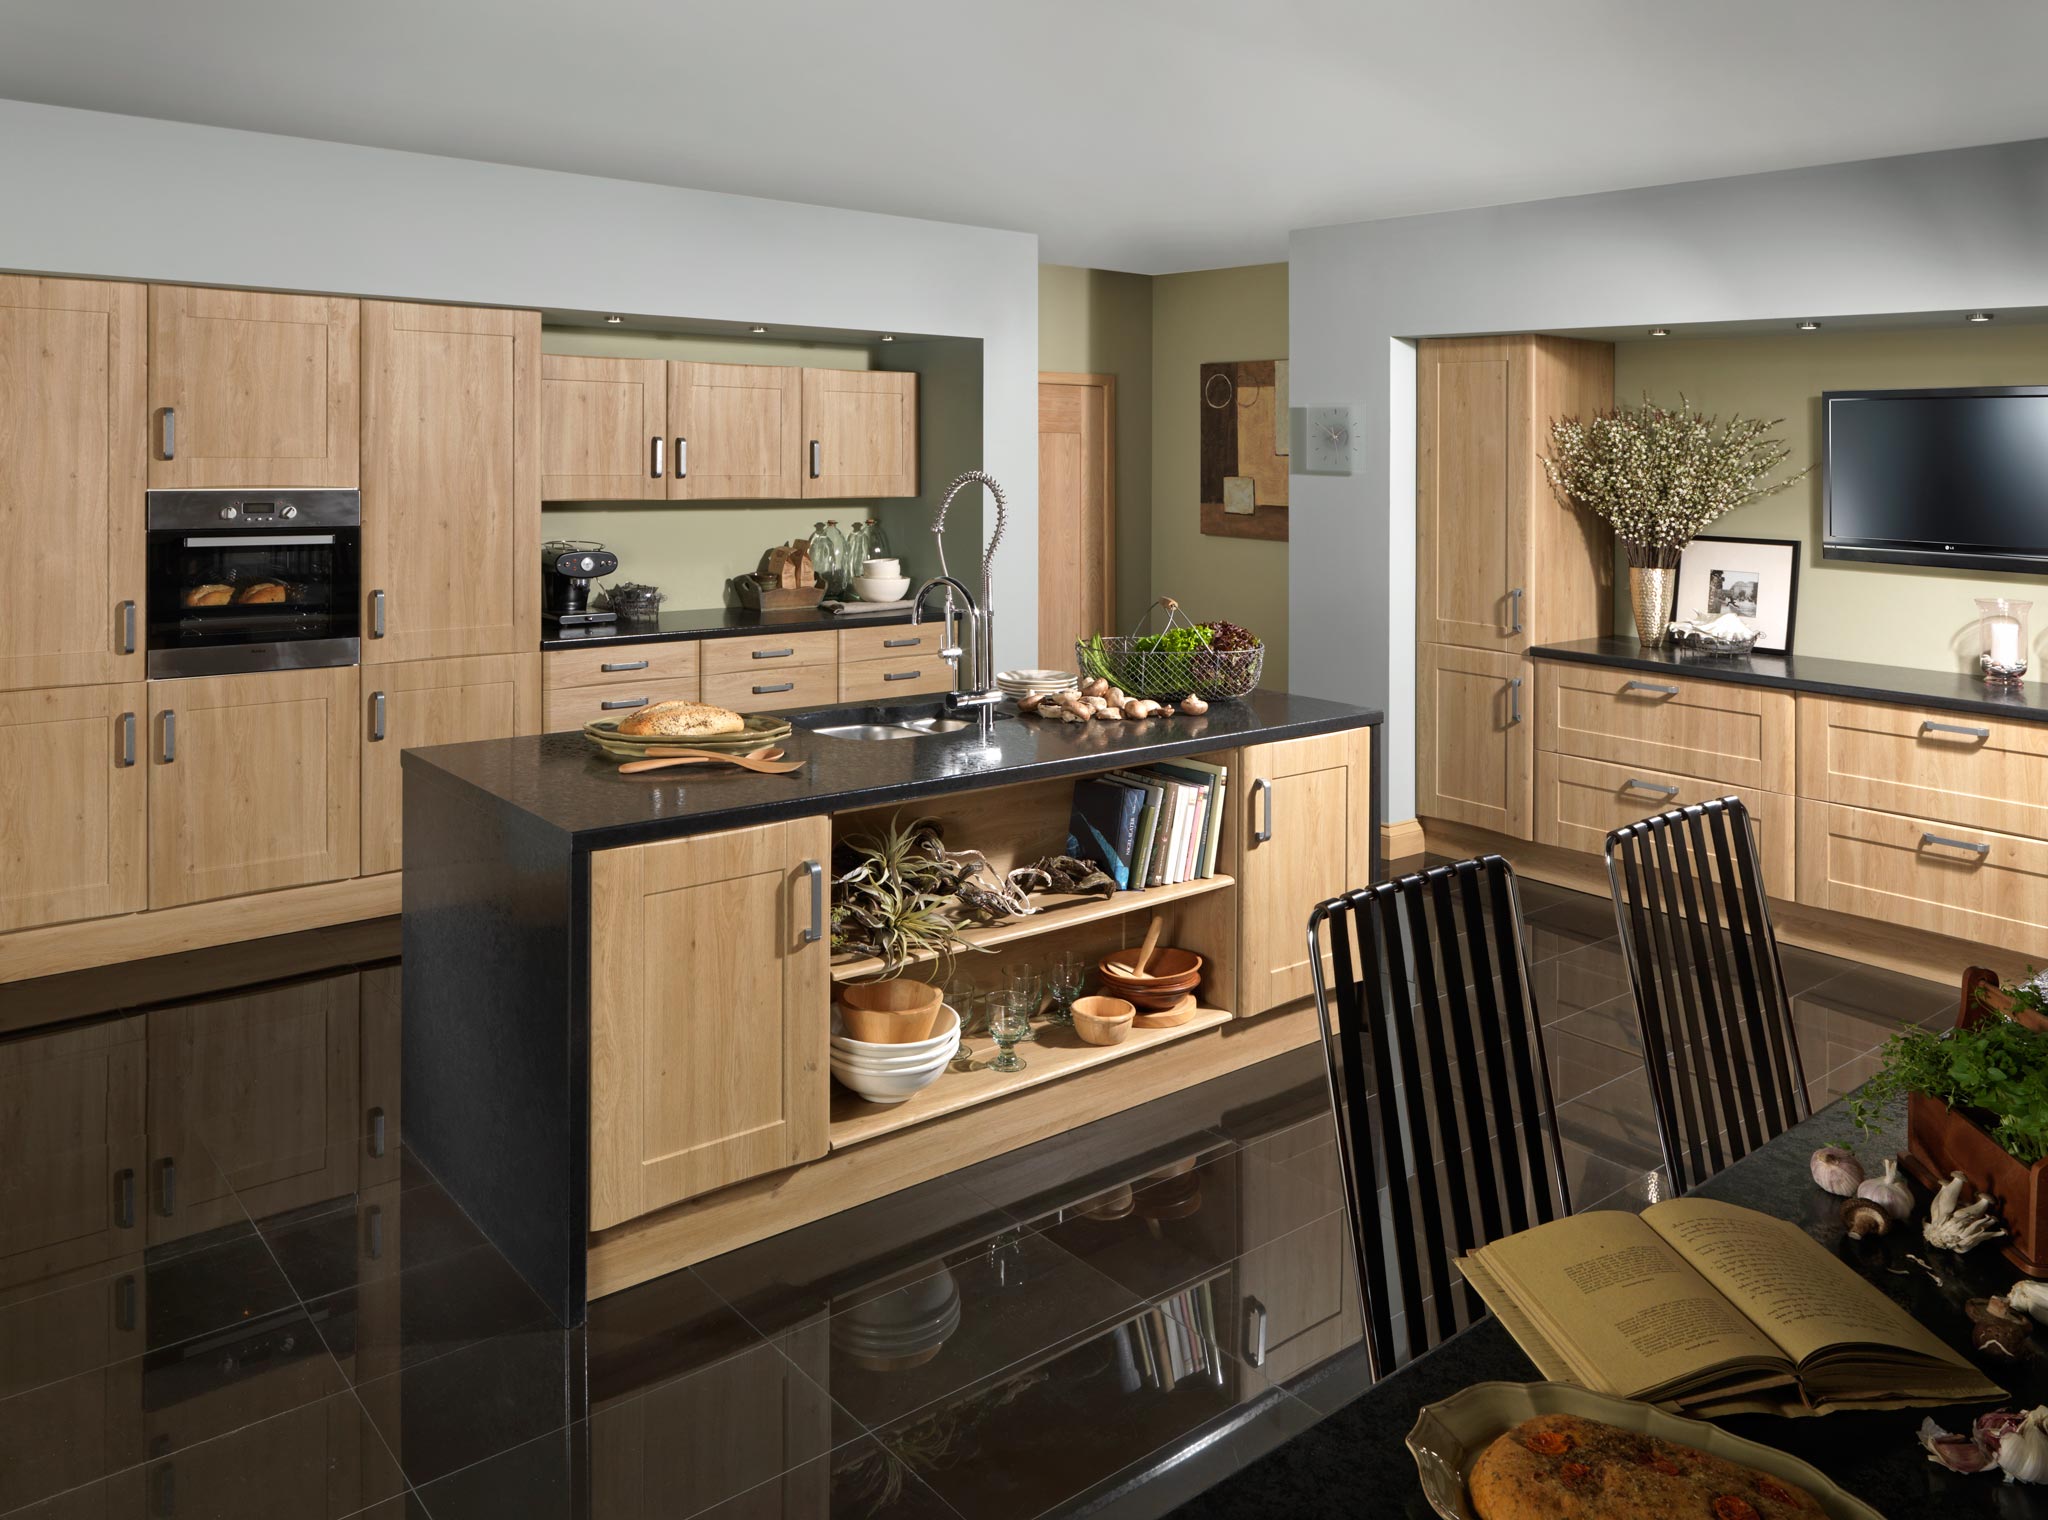 bespoke kitchen doors and draws in a wood finish